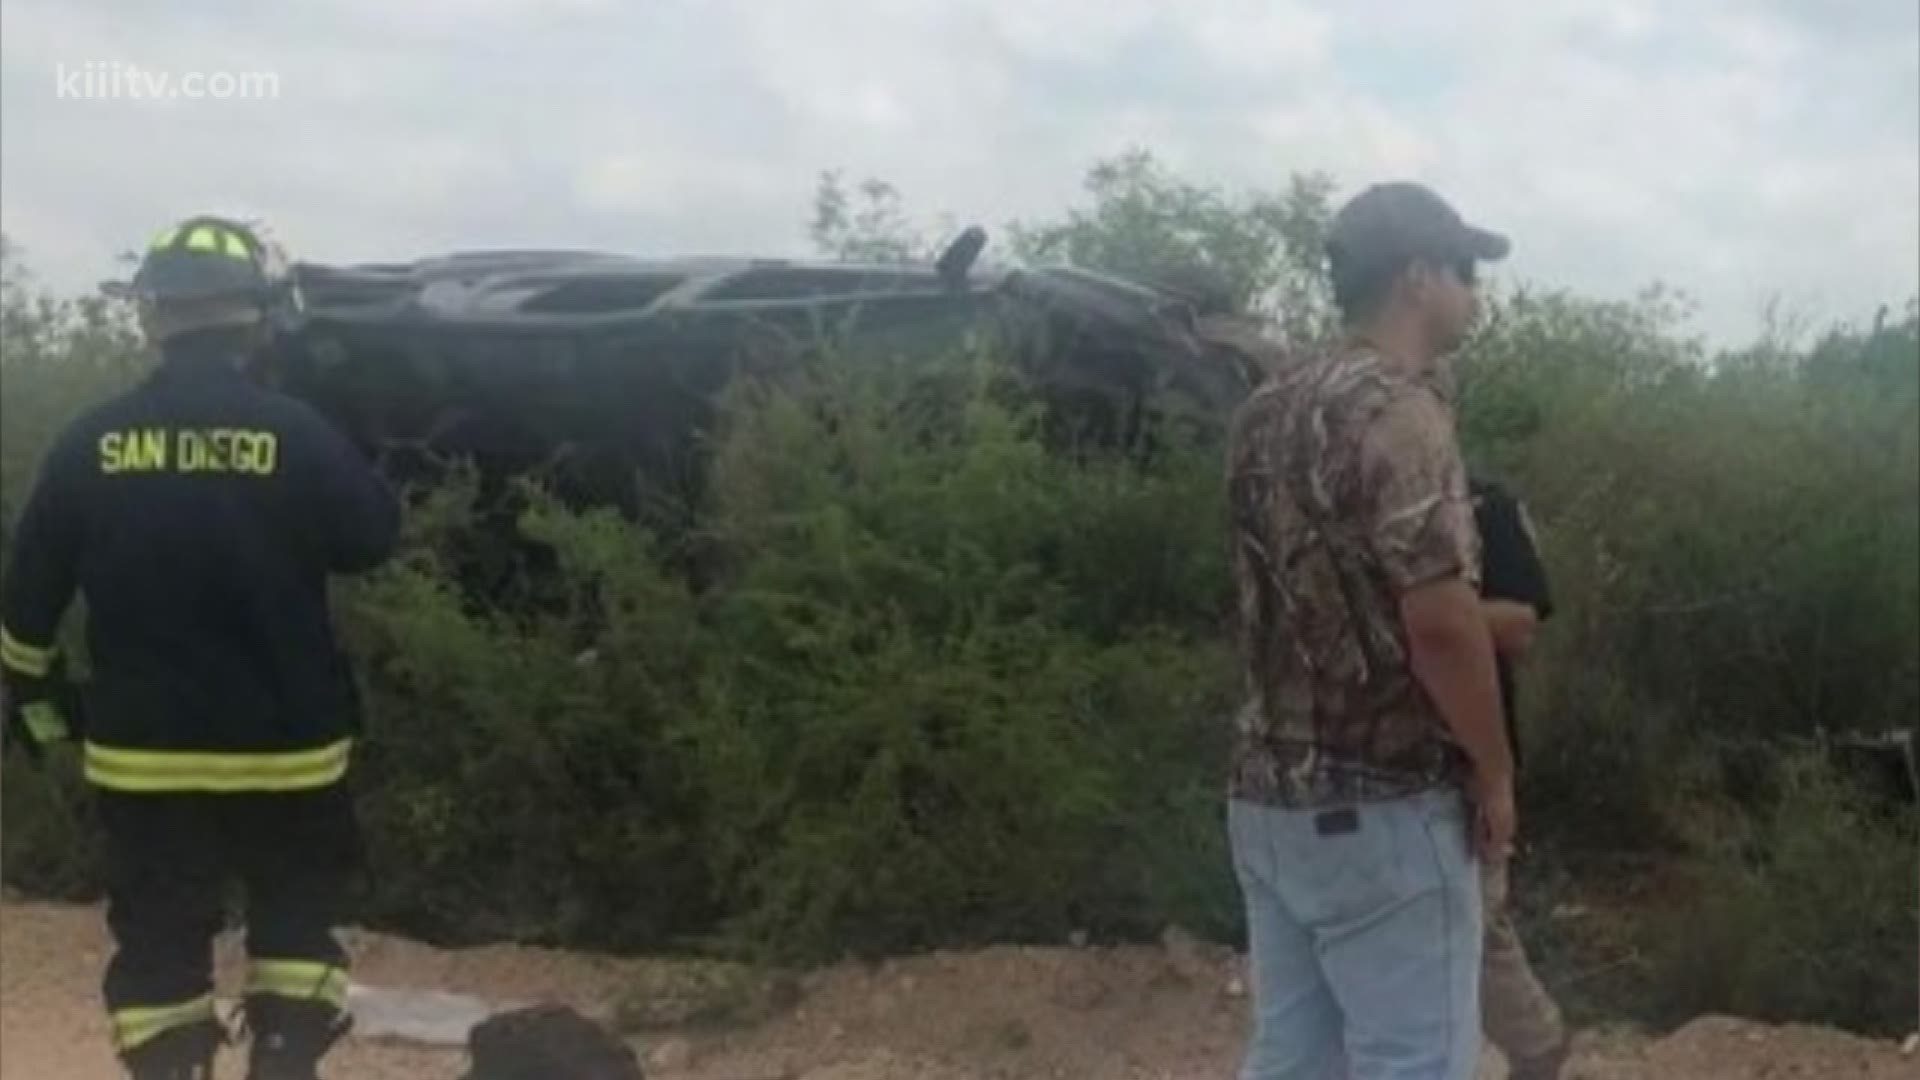 Sheriff's Deputies in Duval County arrested four smugglers they said are responsible for a highspeed chase that killed illegal immigrants on FM 339.